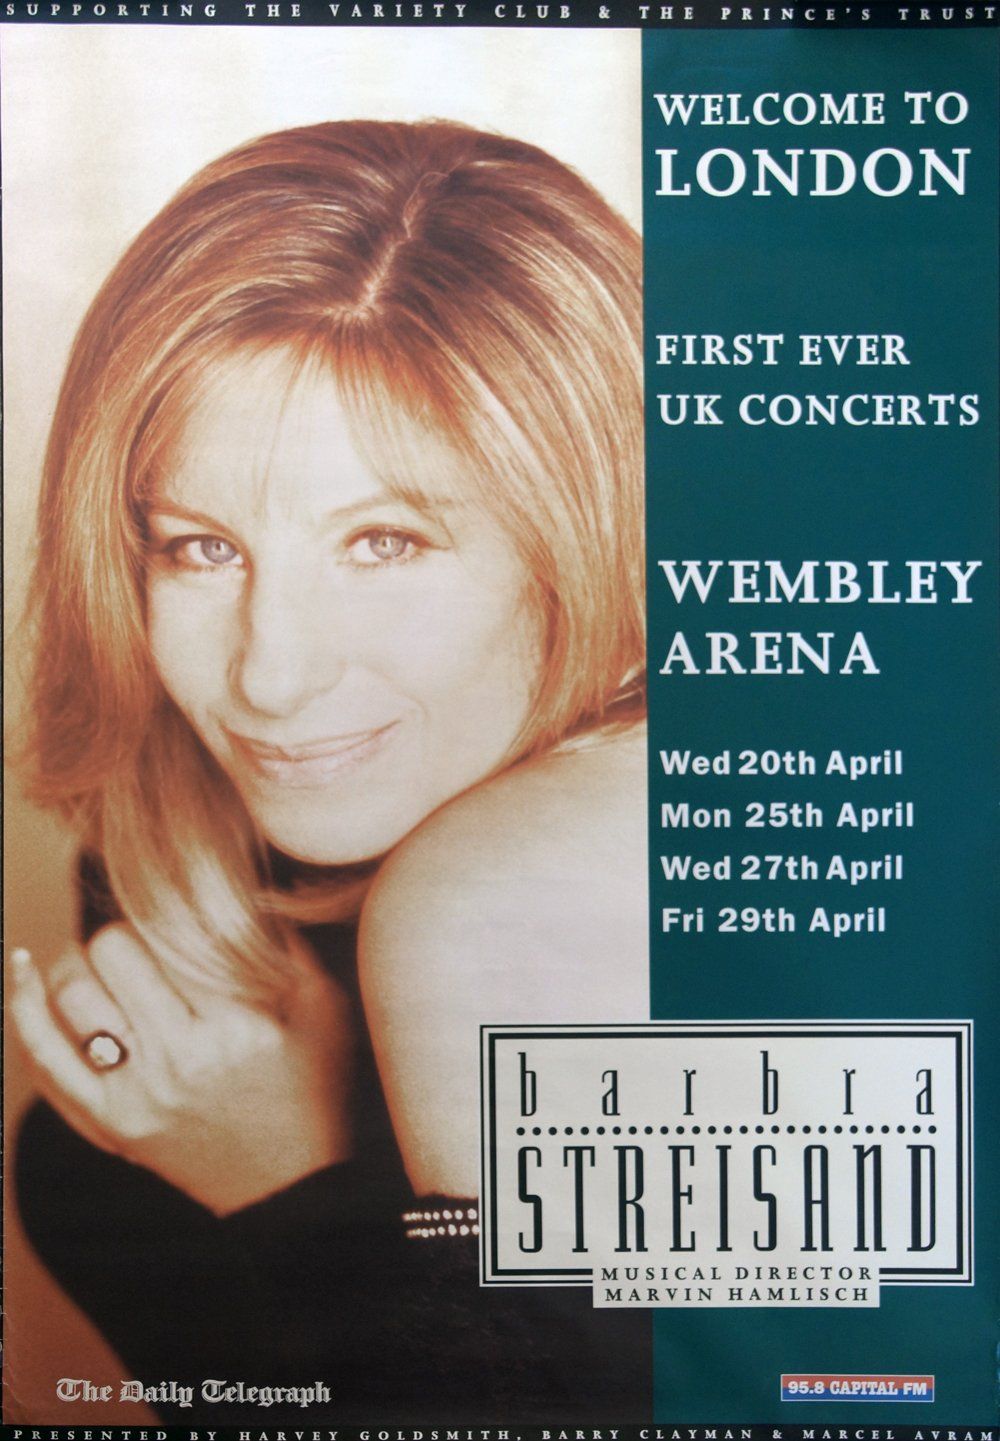 London ad for Streisand's shows at Wembley Arena.